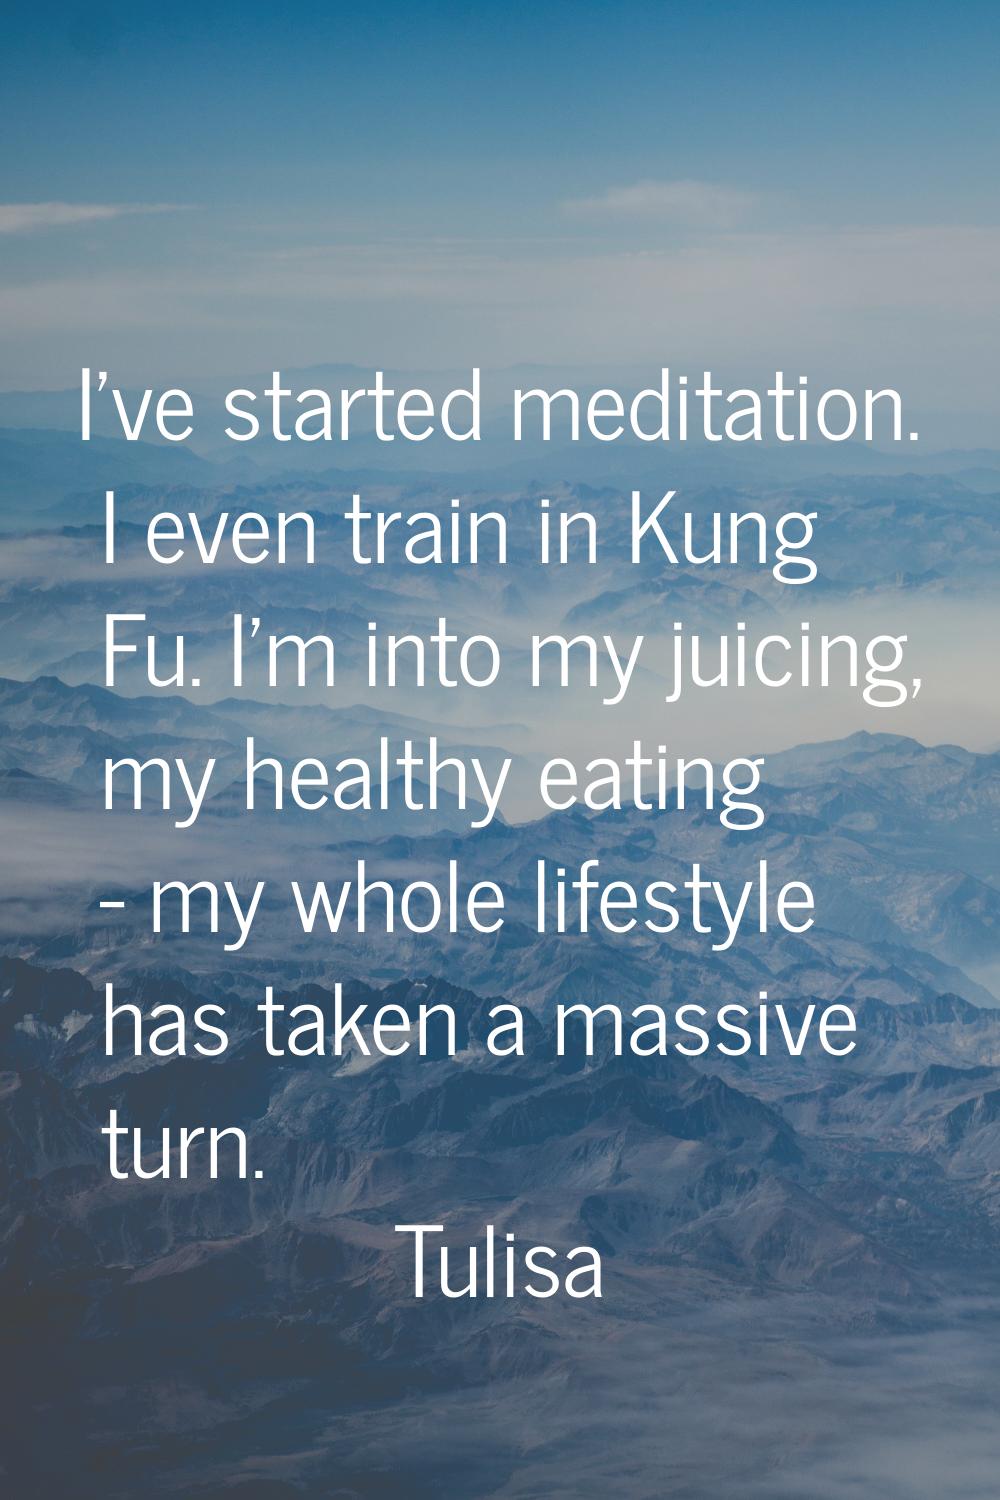 I've started meditation. I even train in Kung Fu. I'm into my juicing, my healthy eating - my whole